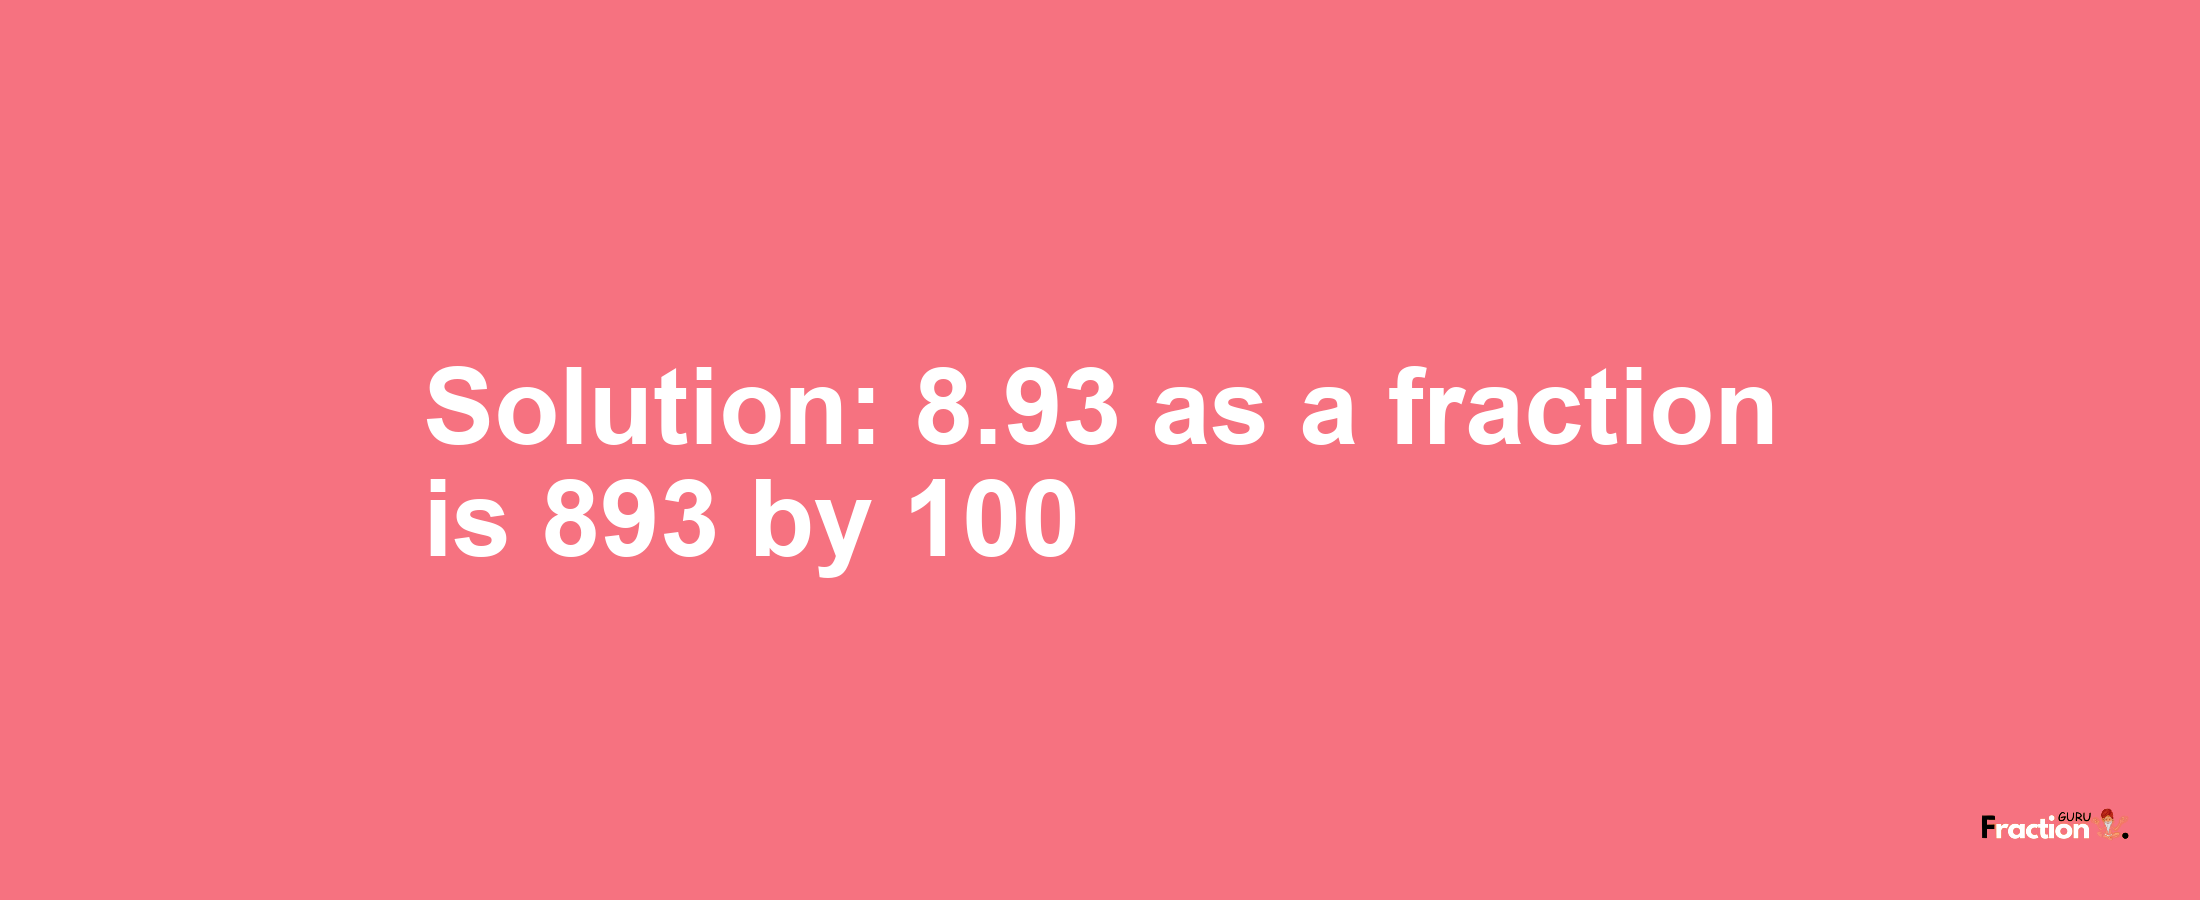 Solution:8.93 as a fraction is 893/100